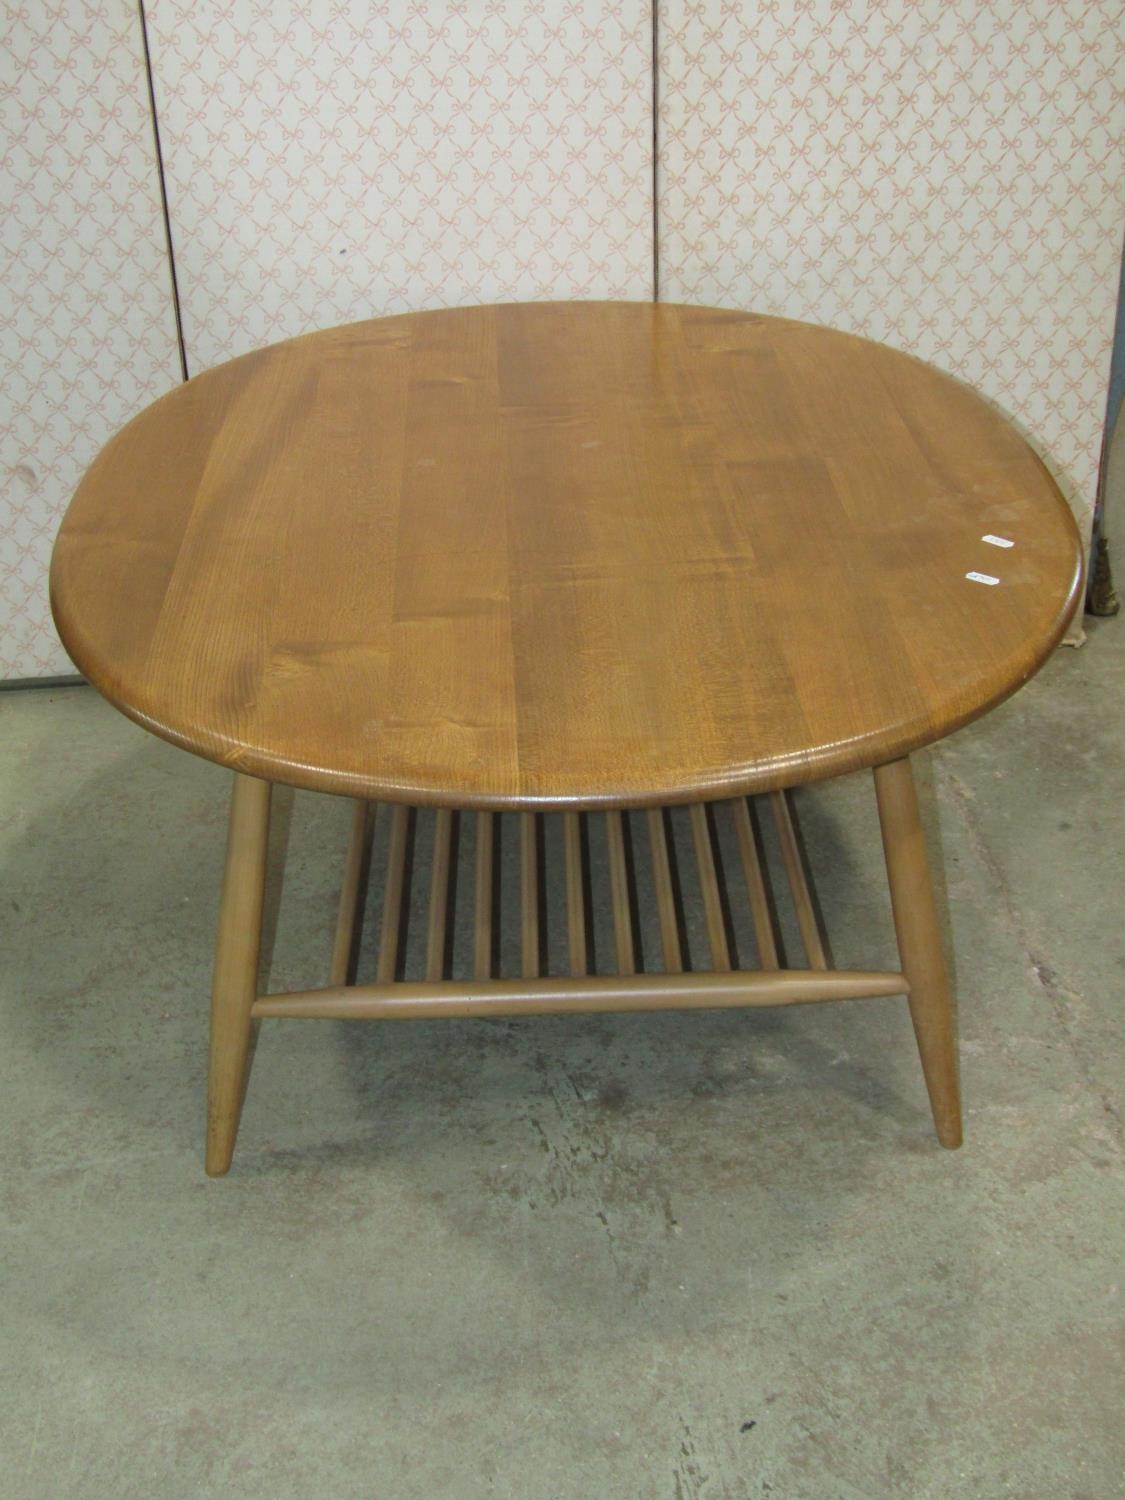 An Ercol occasional table principally in elm, the oval top 100cm max - Image 3 of 3